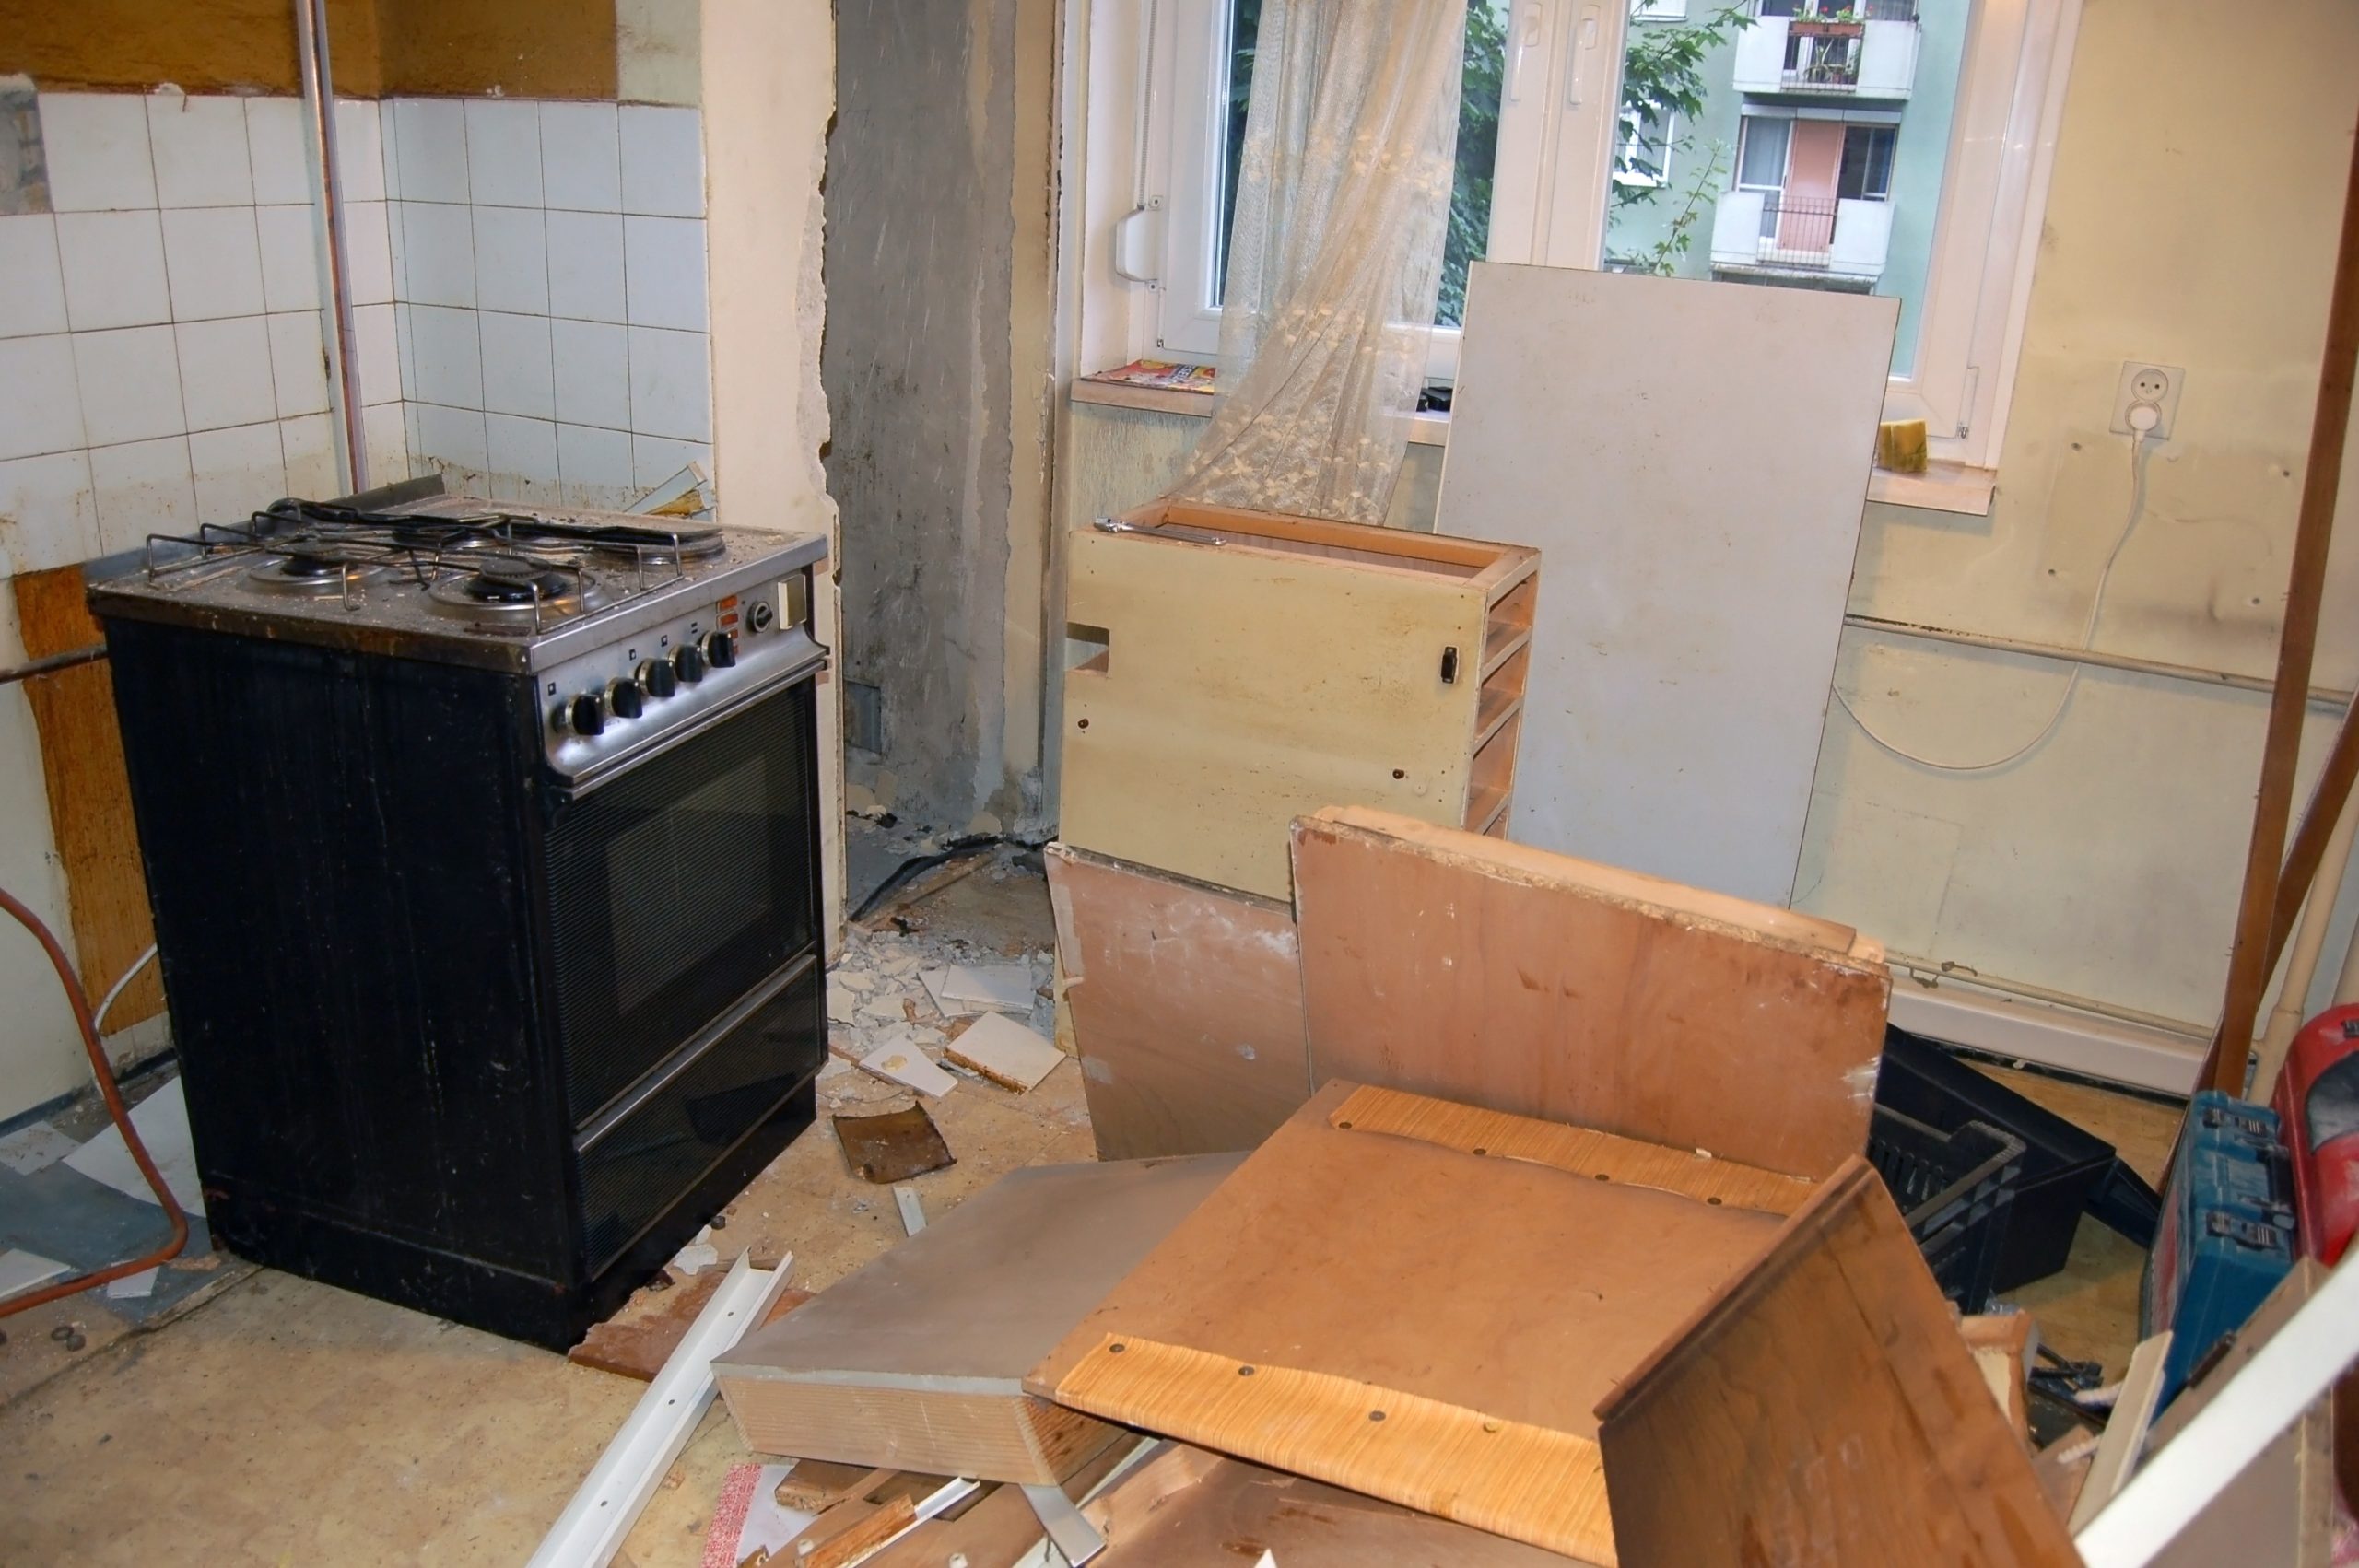 What tools do you need for a kitchen demolition - The Junk Guys